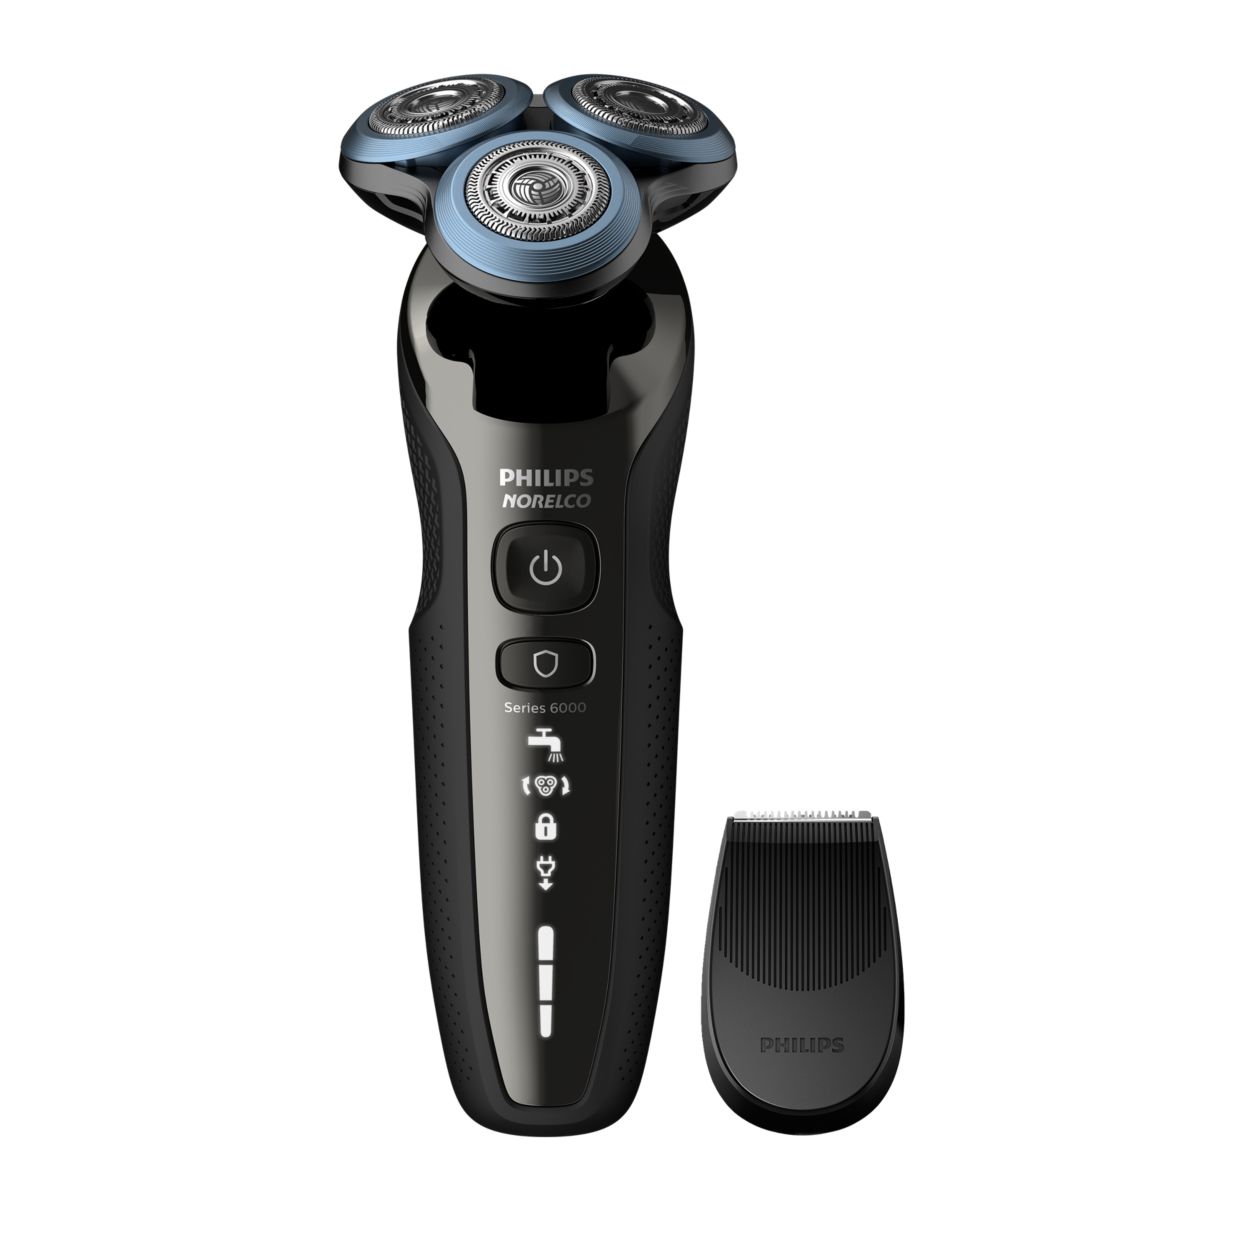 Shaver Series 6000 Wet And Dry Electric Shaver S688081 Norelco